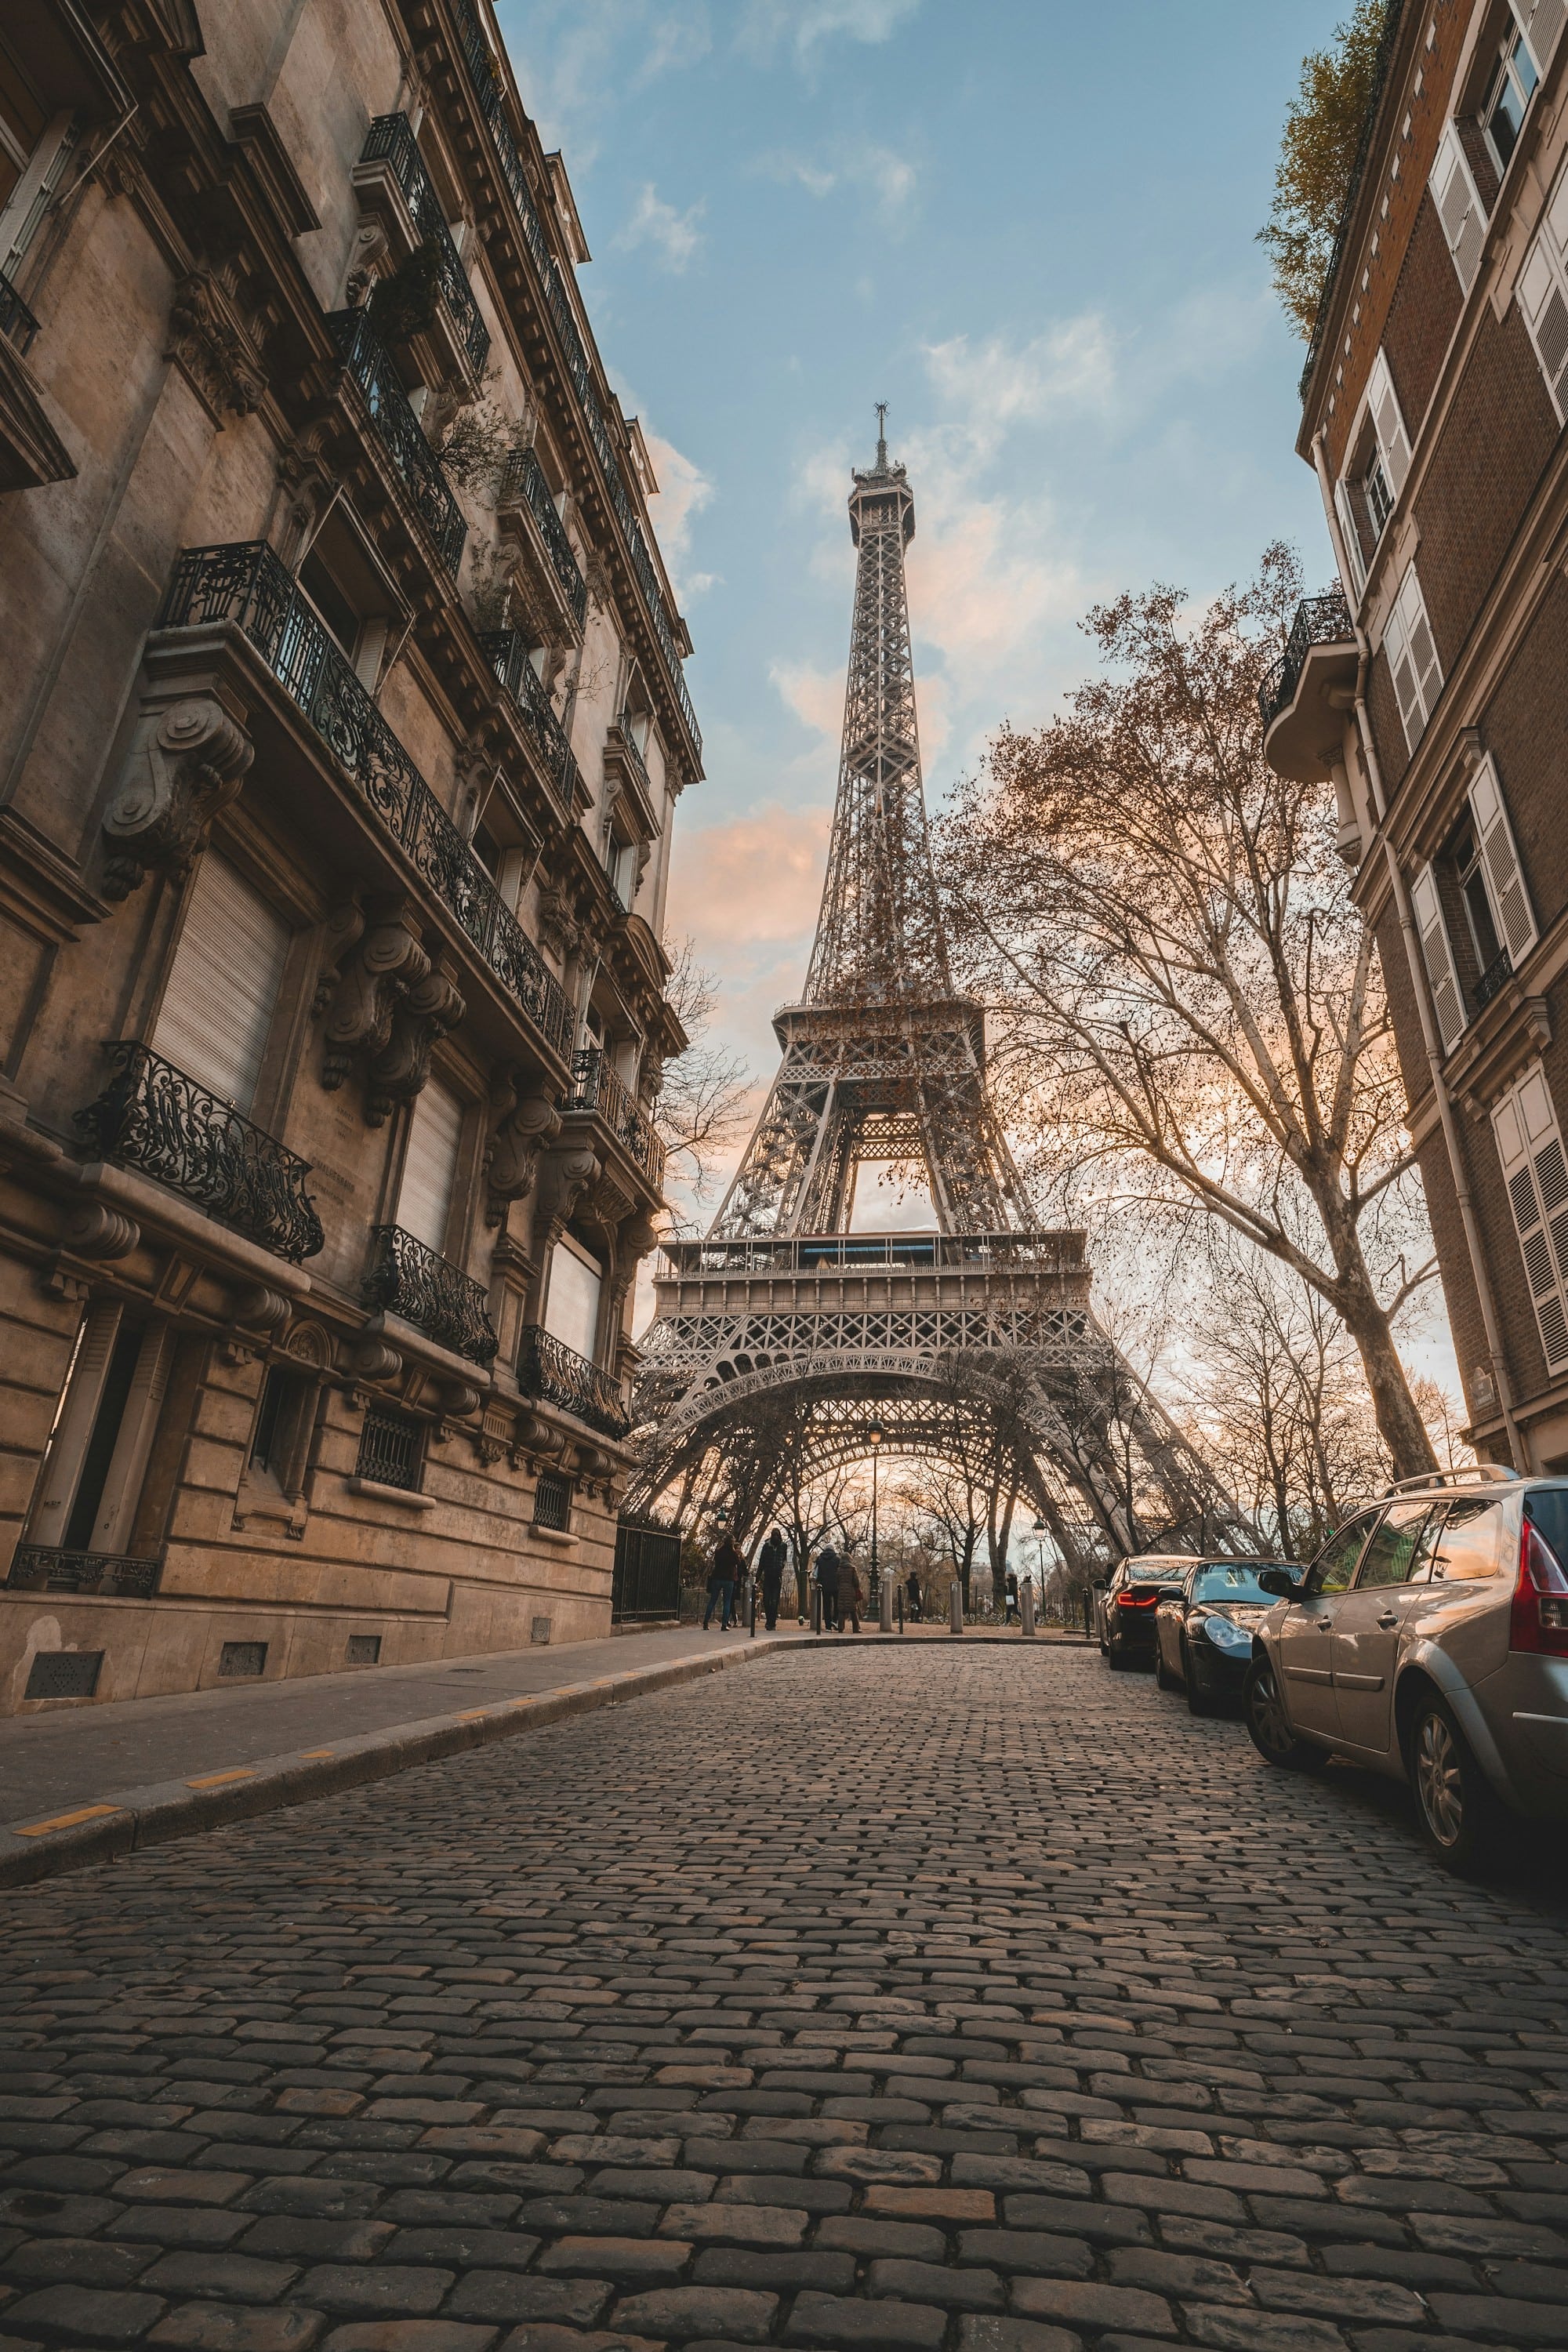 The Eiffel Tower, an iconic symbol of Paris and one of the most recognizable structures in the world, stands majestically on the Champ de Mars.